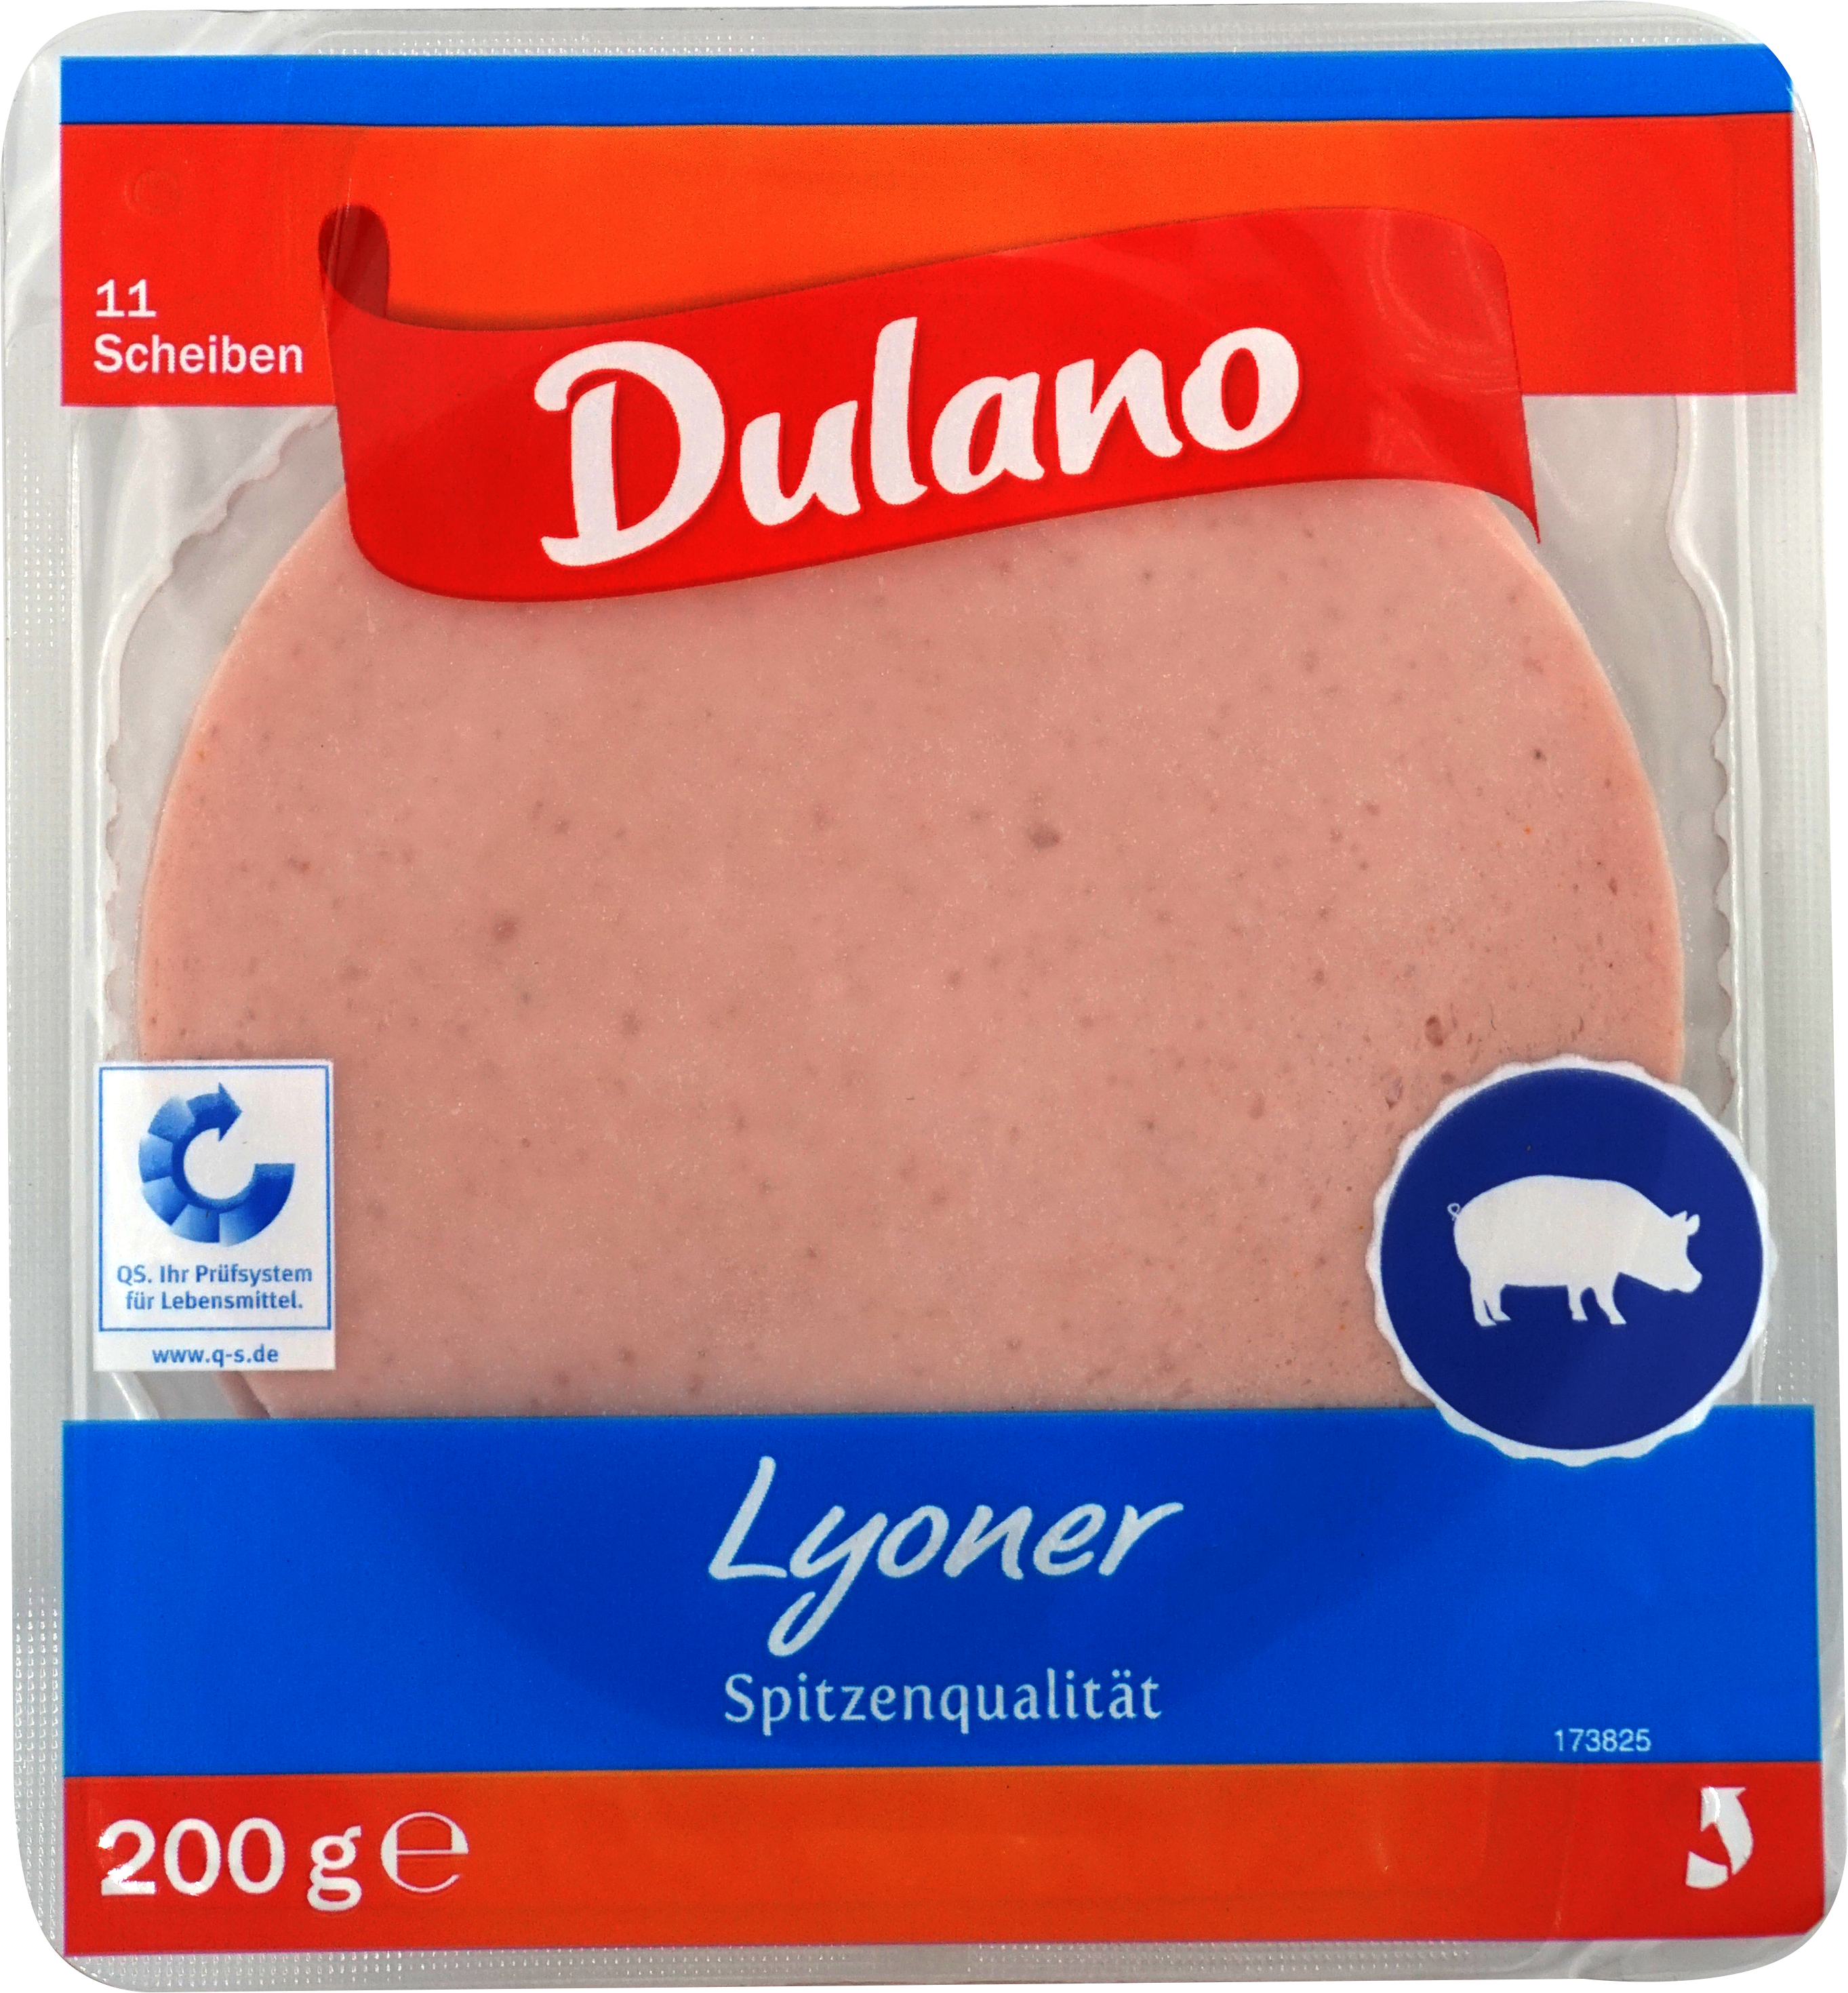 Dulano (Lidl) · Lyoner (200 TFB Meat/Poultry/Sausages / Pork Beverage GmbH Meat/Poultry mynetfair The - grams) Produktionsstätten Nortrup Tobacco Germany Butchers / - Sausages Sausages Food · Prepared/Processed Prepared/Processed - Family